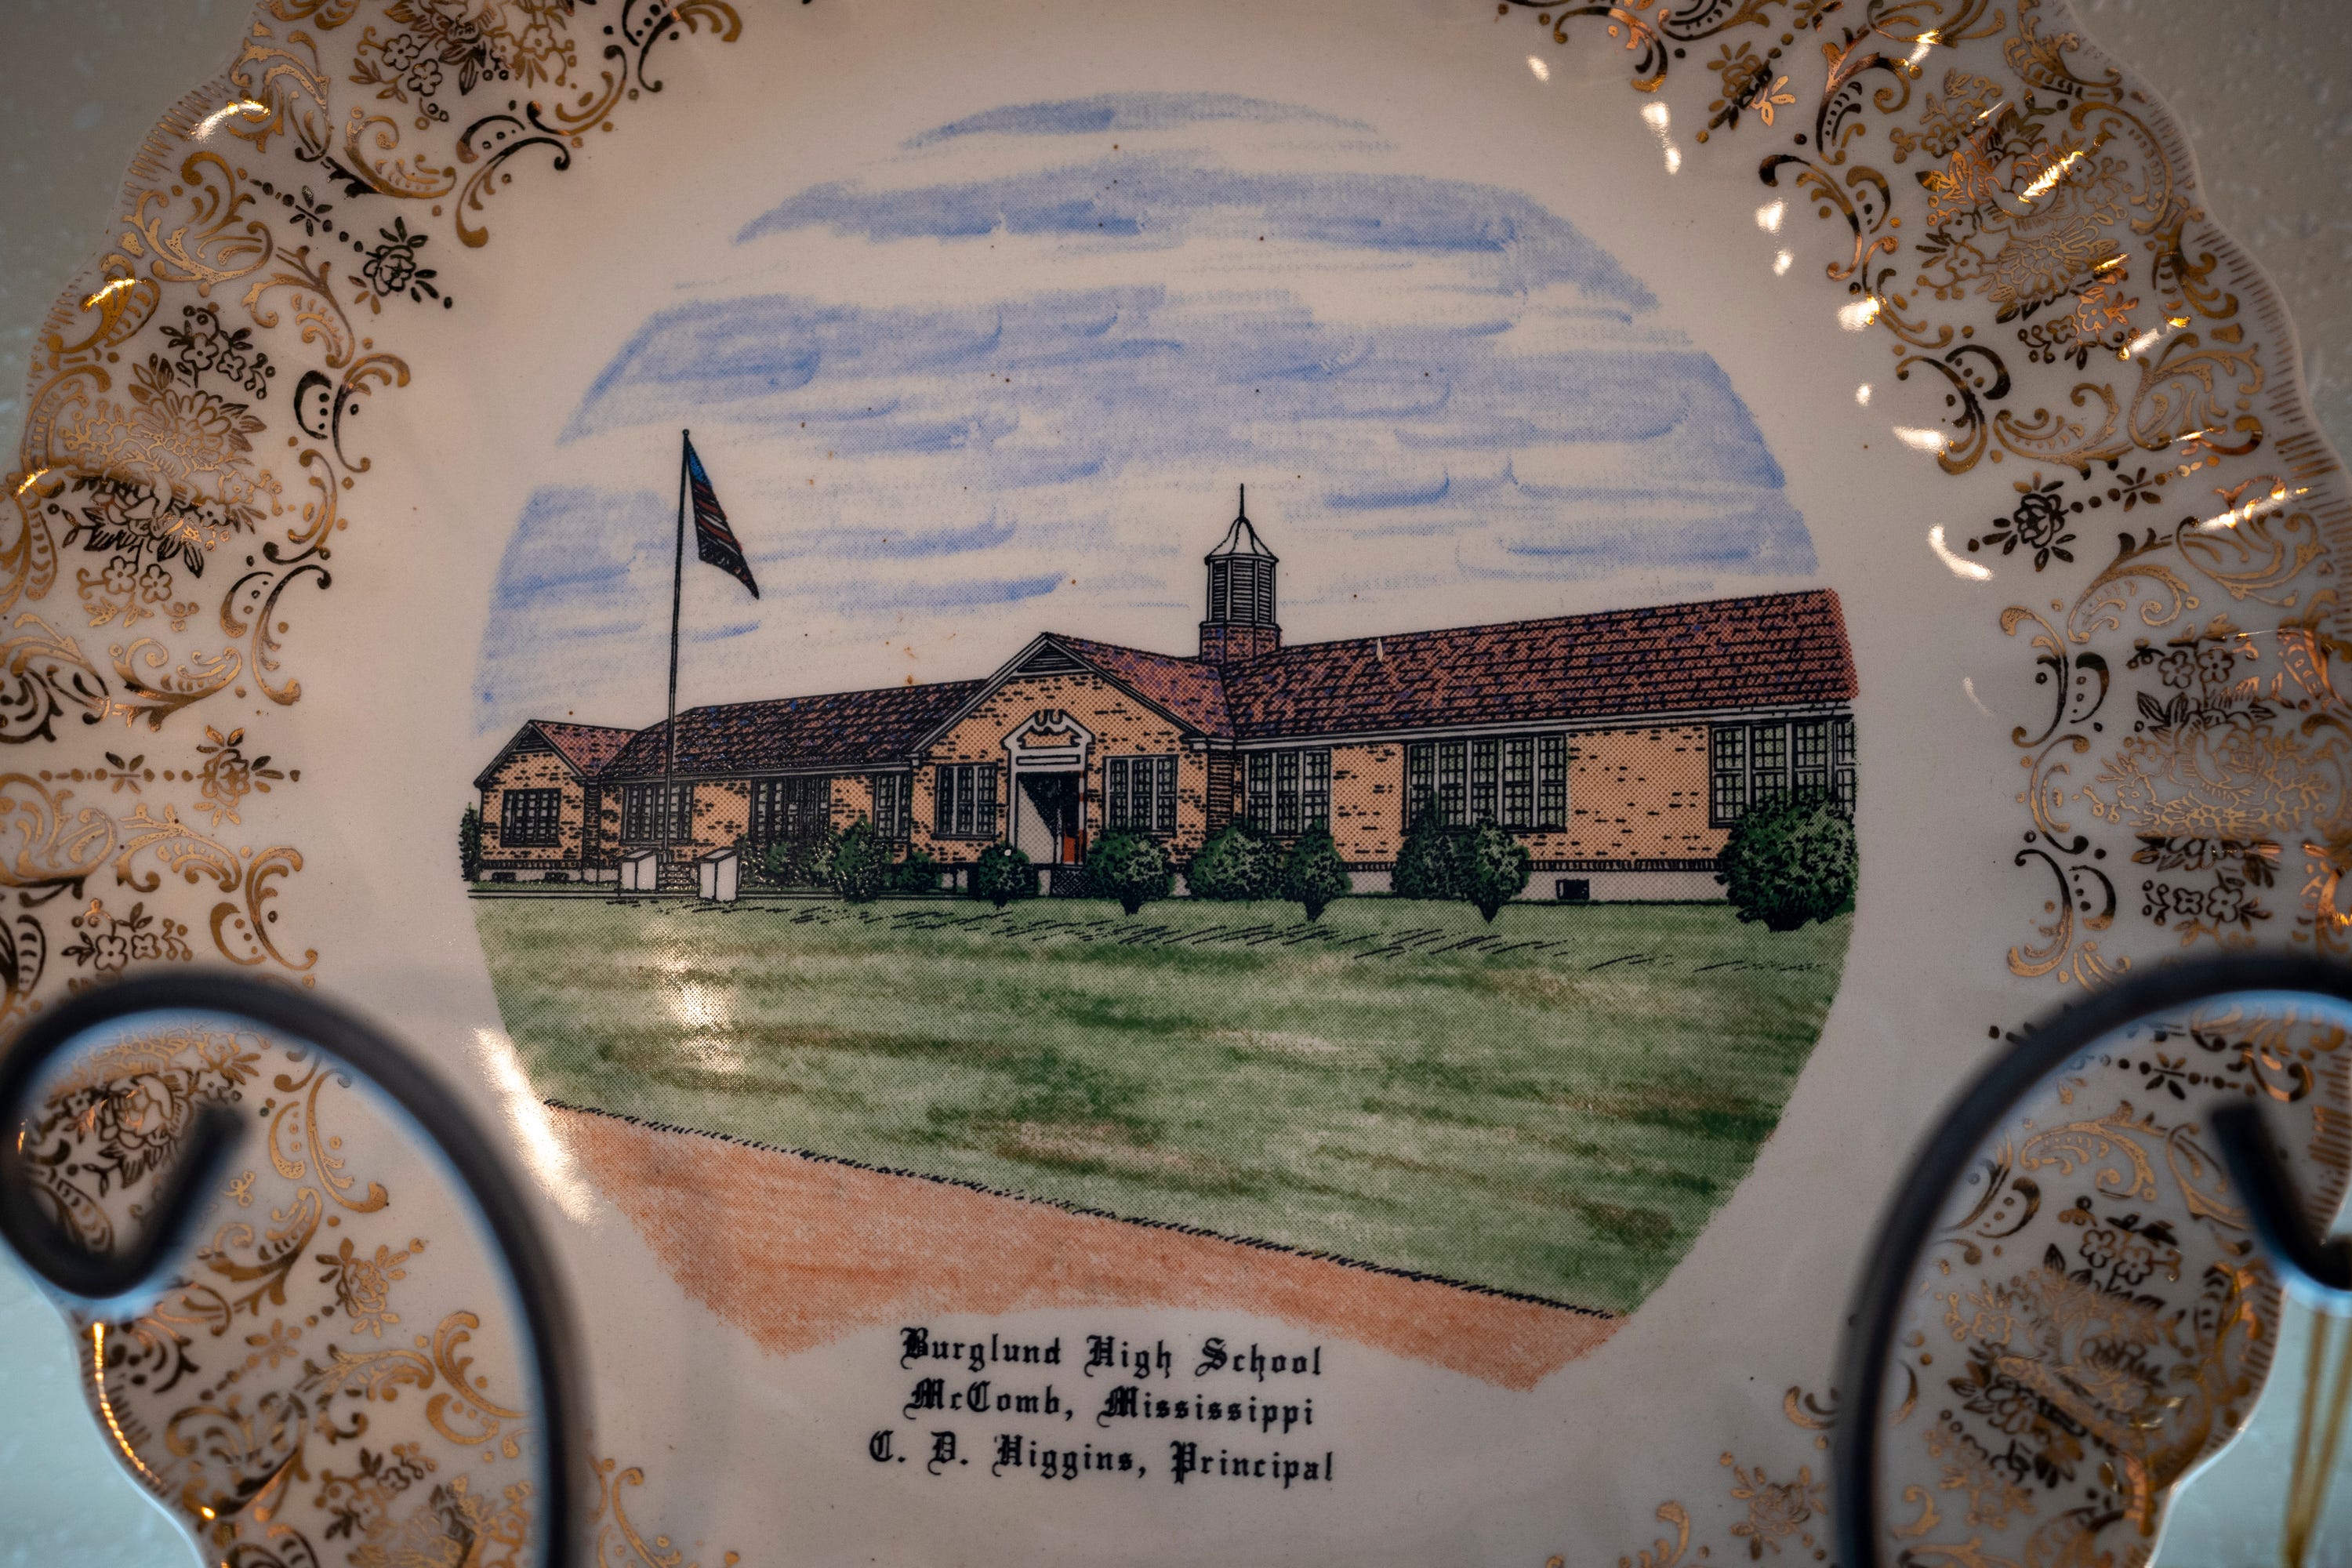 A plate commemorating Burglund High School is on display in the Black History Gallery in McComb, Miss.